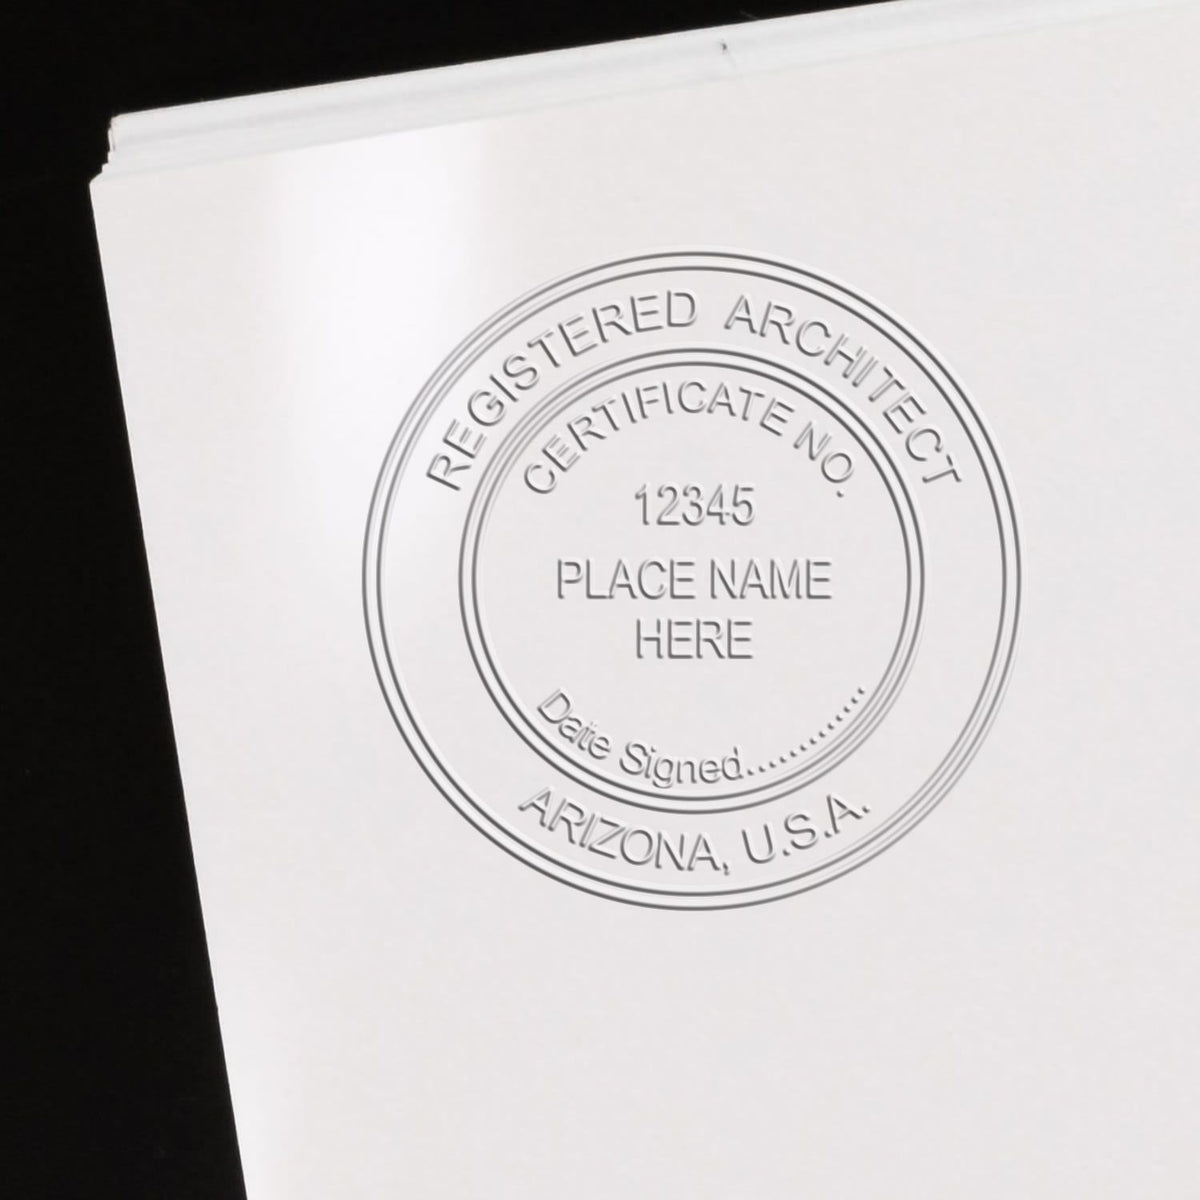 This paper is stamped with a sample imprint of the Extended Long Reach Arizona Architect Seal Embosser, signifying its quality and reliability.